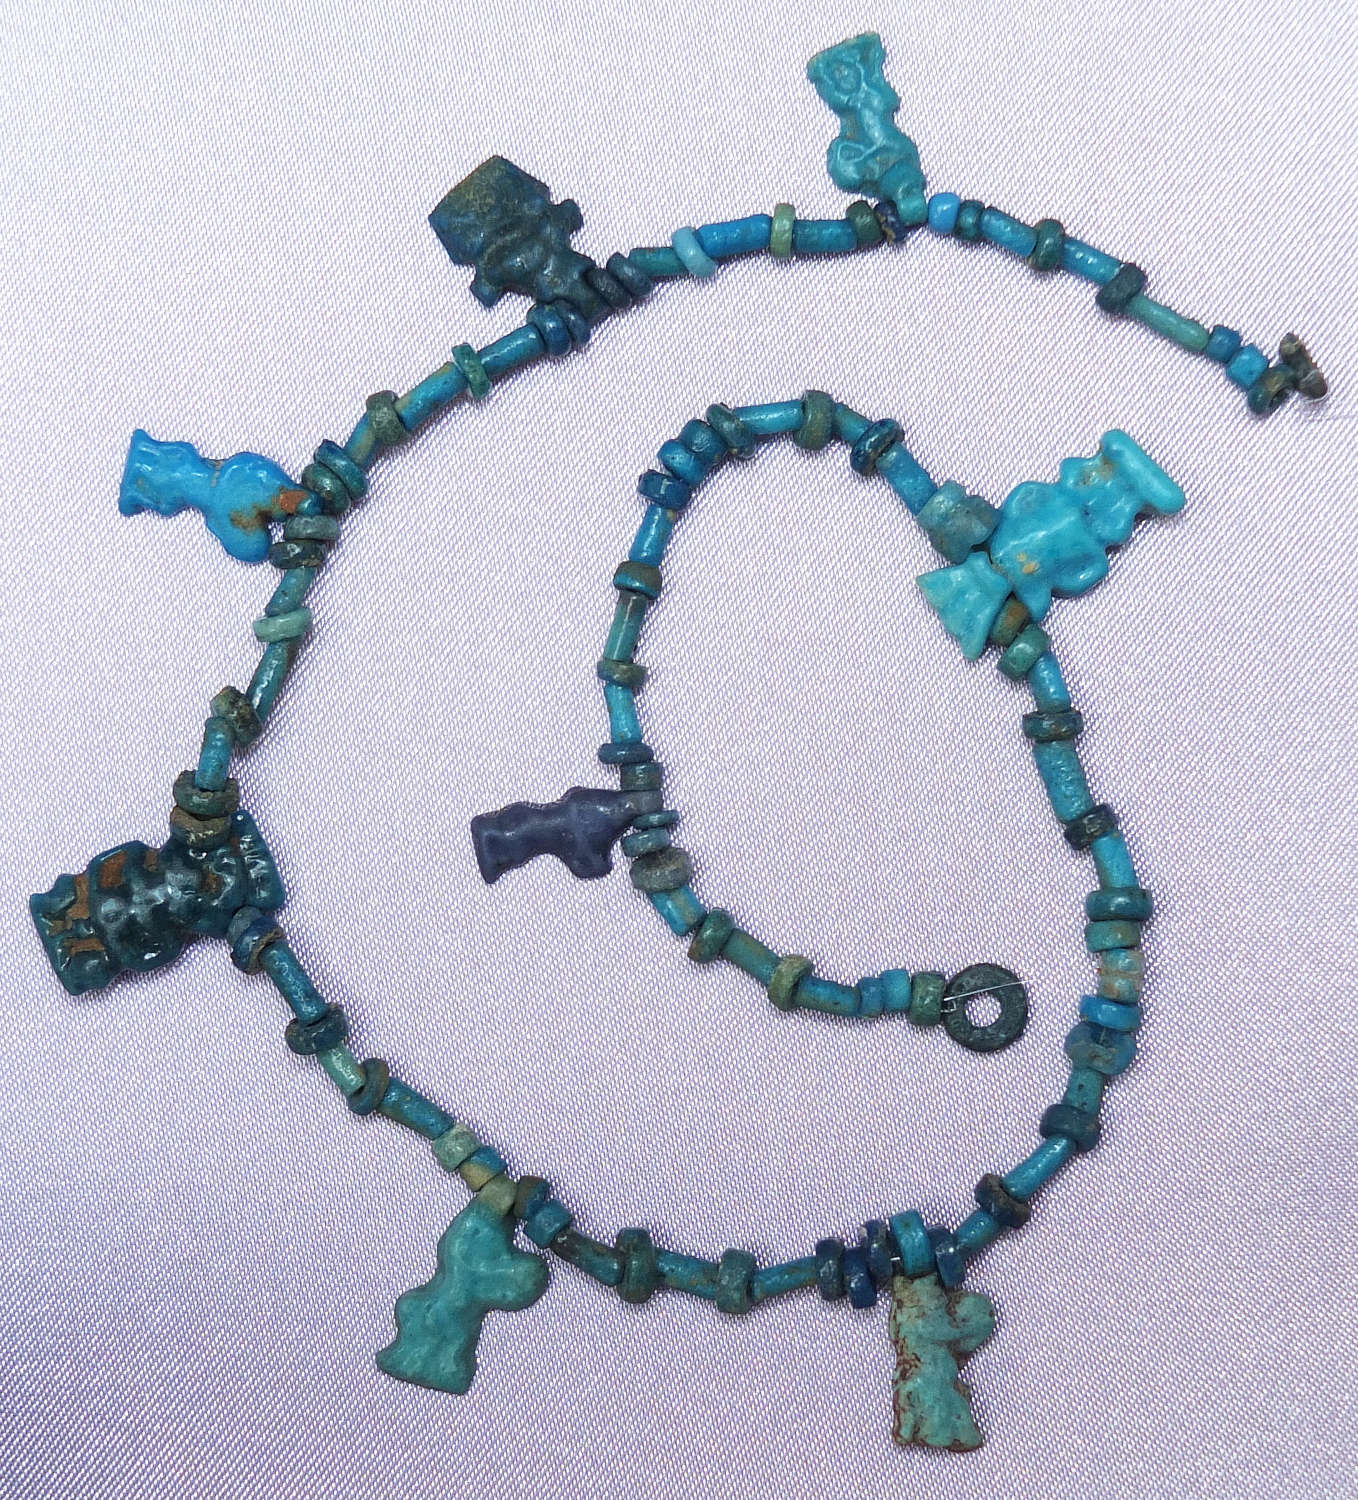 A length of ancient Egyptian beads with Amarna Period Bes pendants